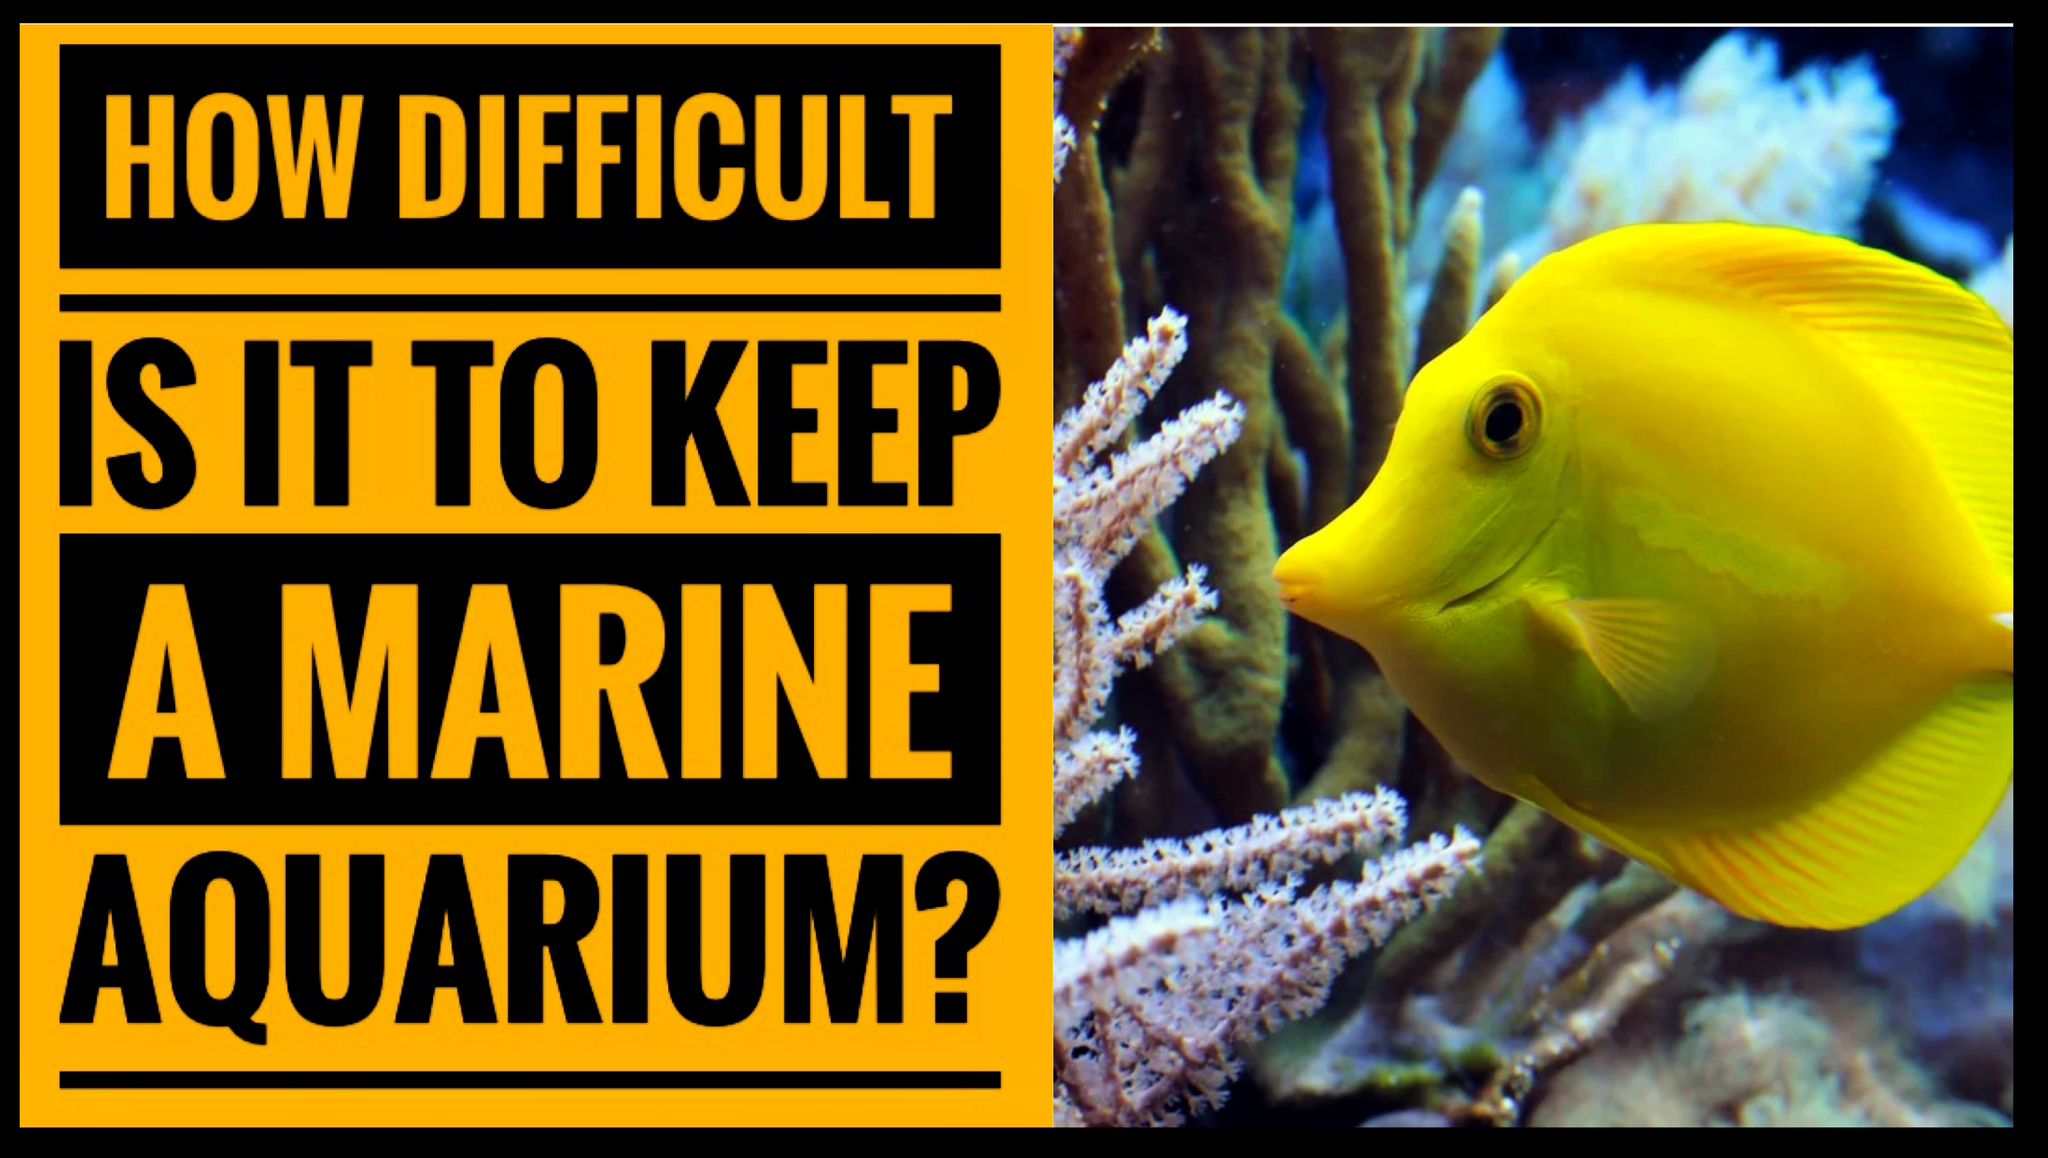 How Difficult Is It To Keep A Marine Aquarium?